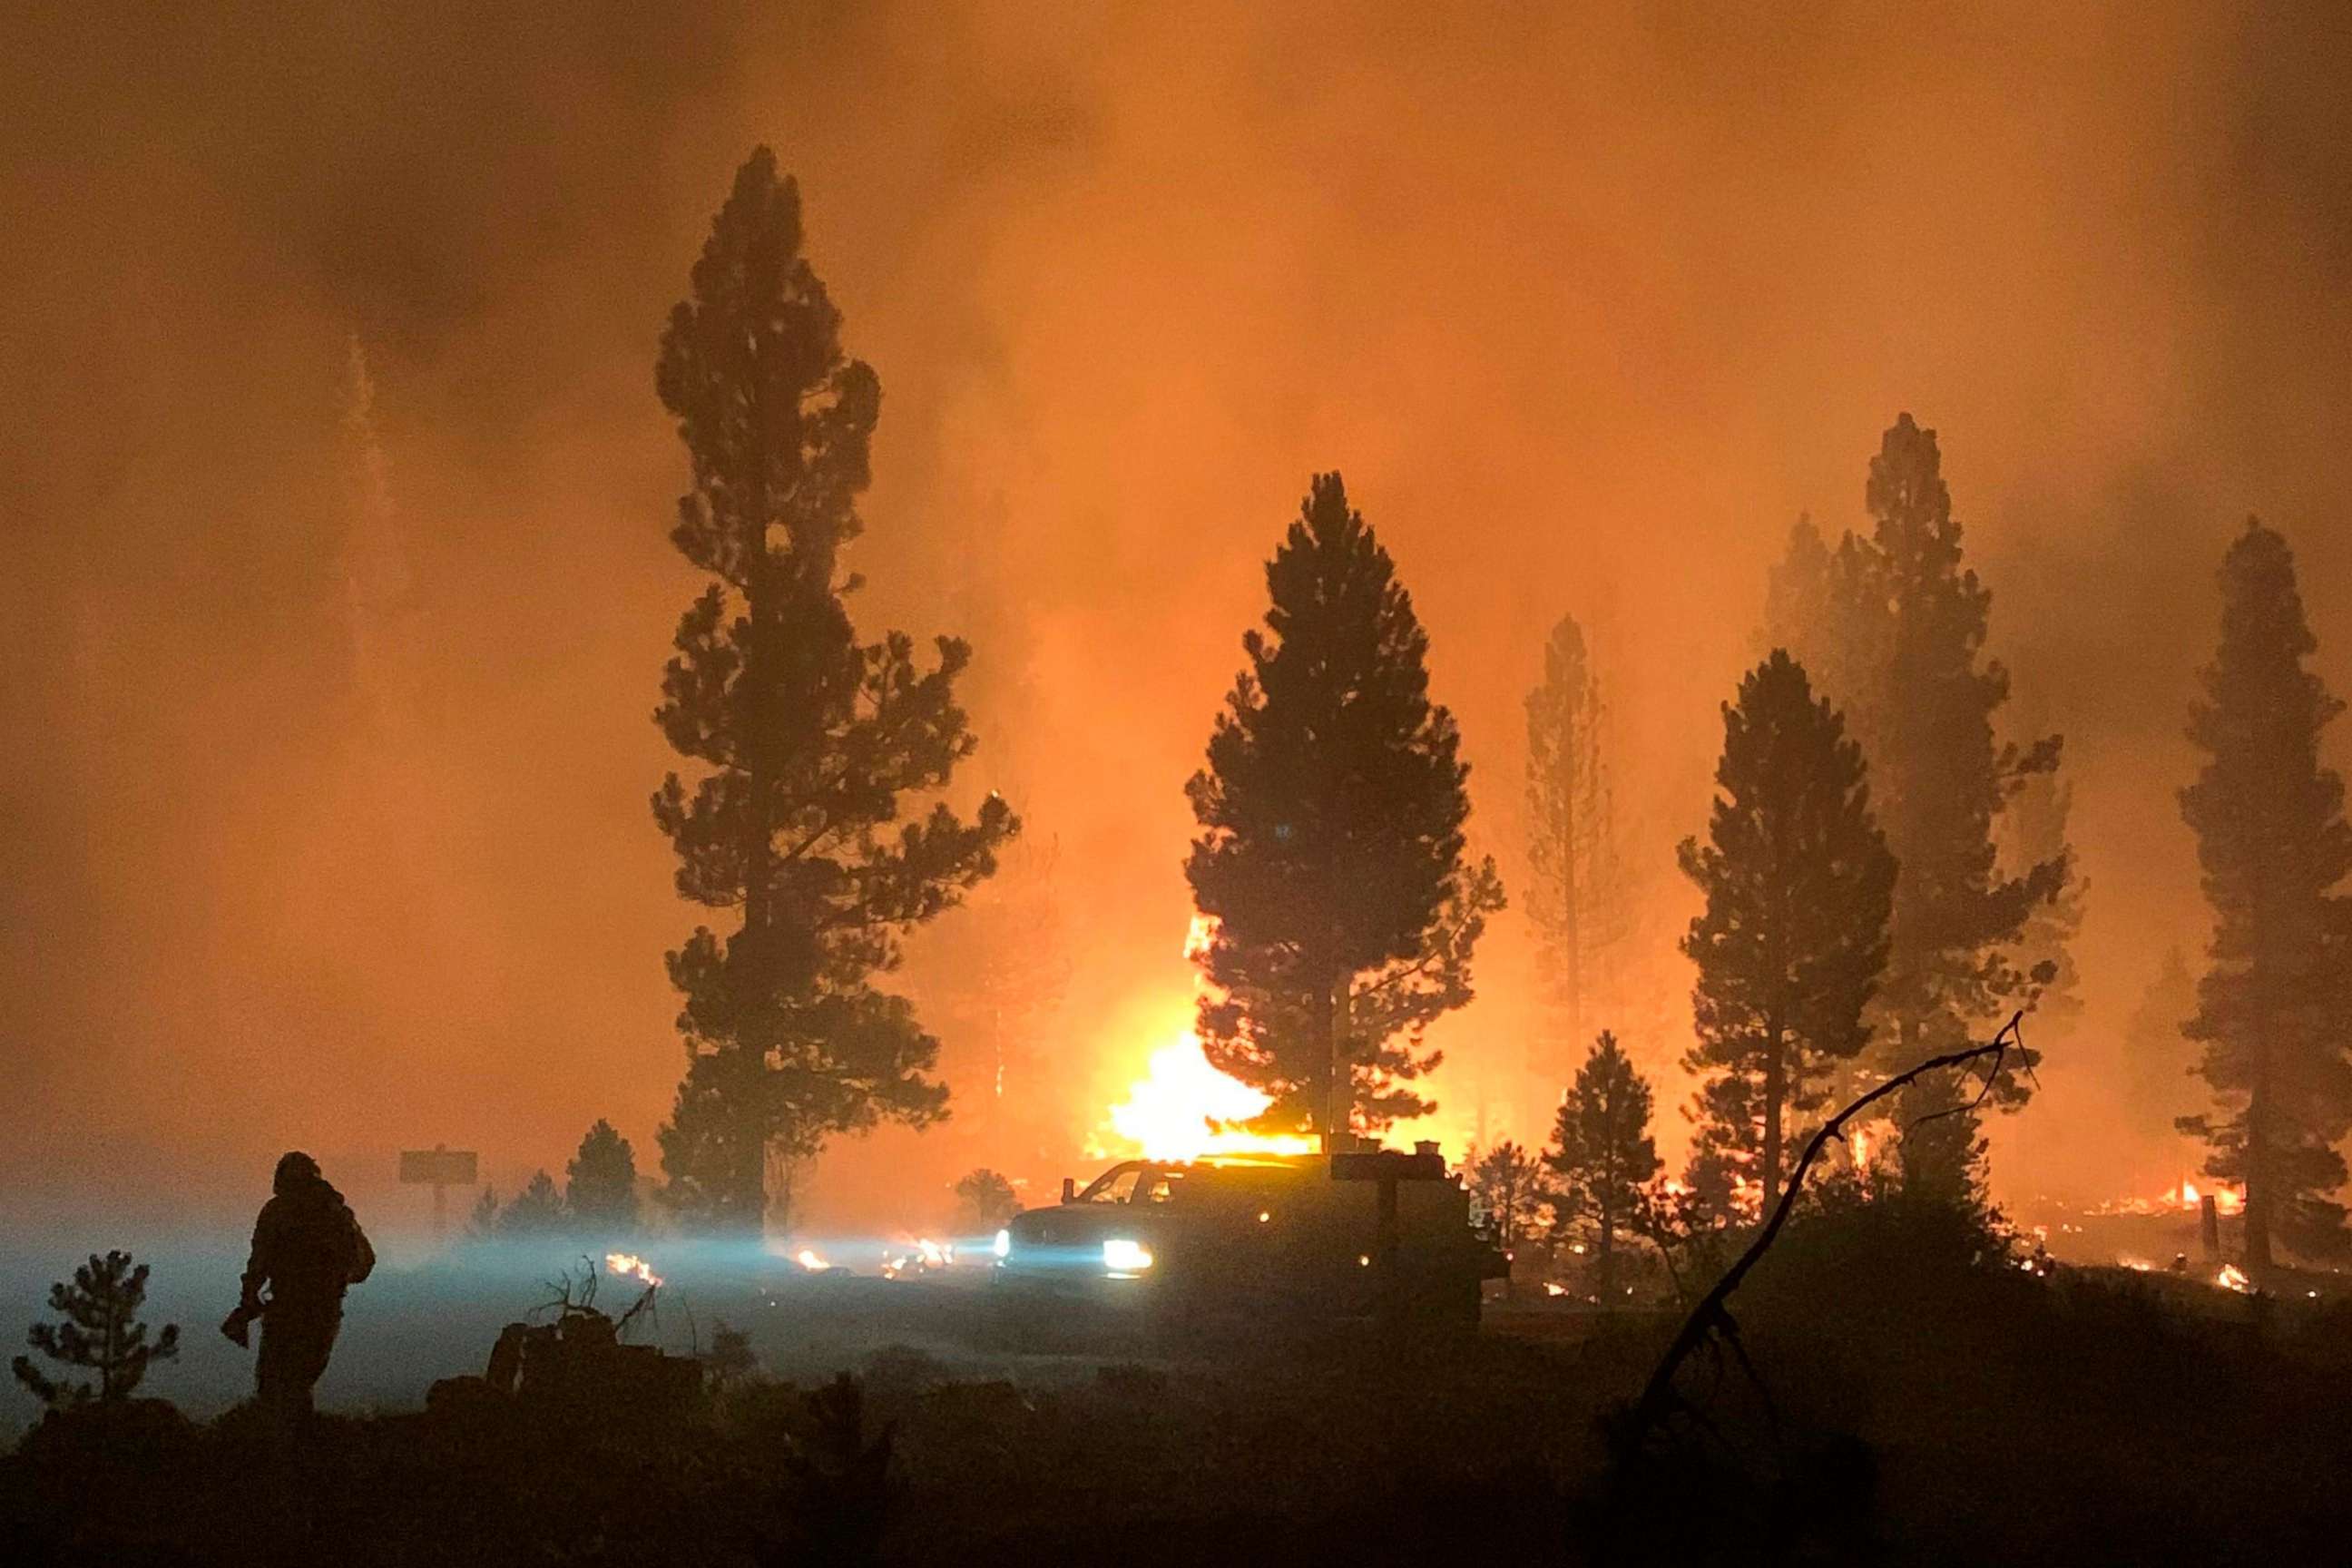 PHOTO: The Bootleg Fire burns at night in southern Oregon on July 17, 2021, in an image provided by the Bootleg Fire Incident Command. 